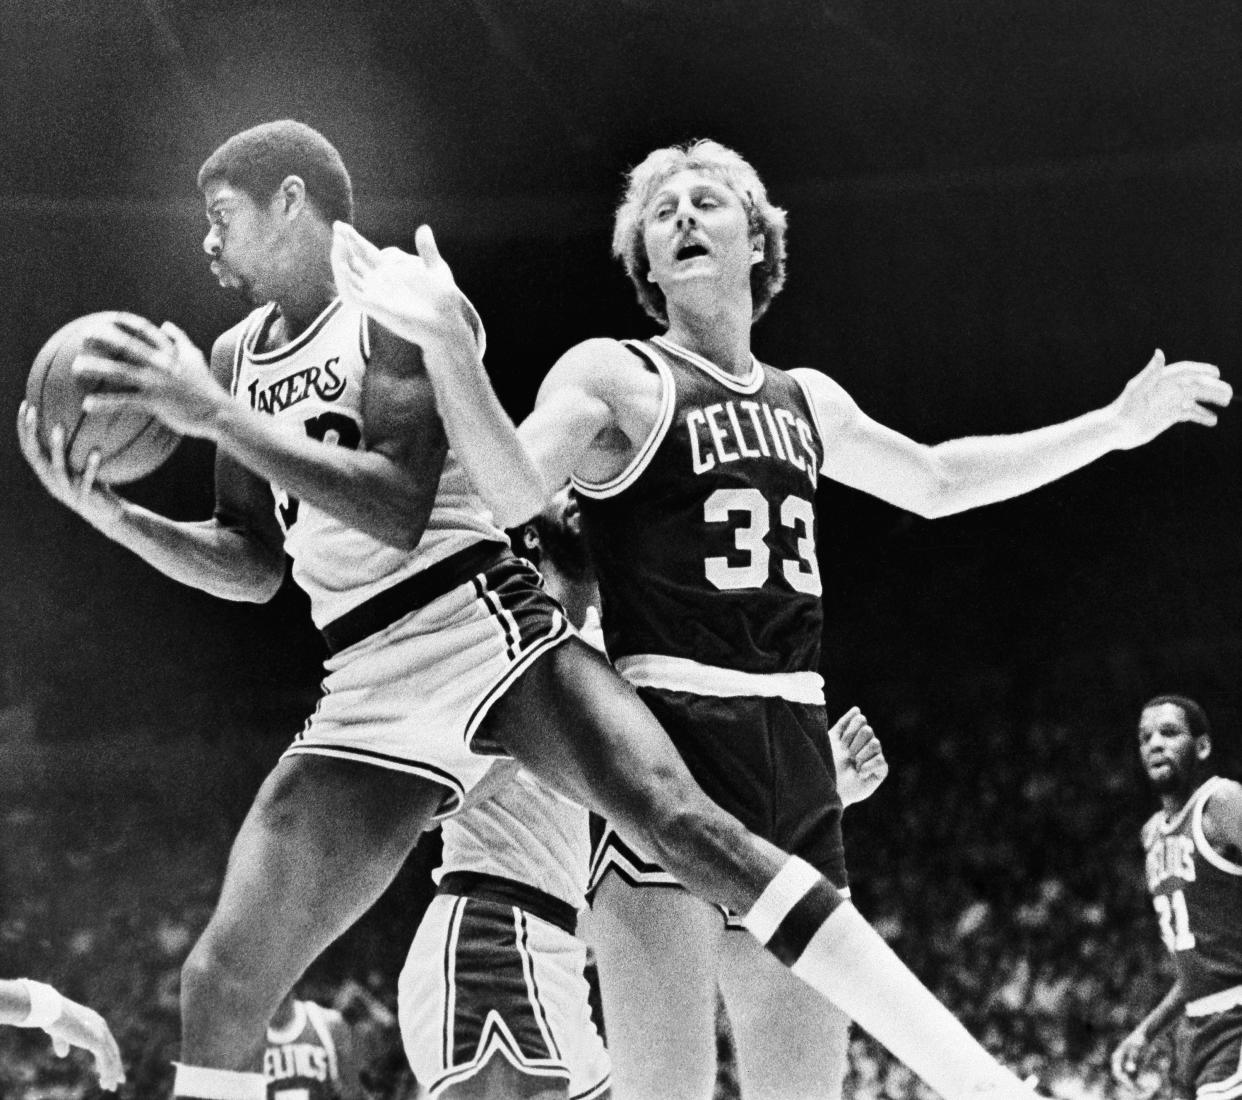 Los Angeles Lakers Earvin "Magic" Johnson (32) rips a rebound from the hands of Boston Celtics Larry Bird (33) during the first half, Dec. 28, 1979 in Los Angeles. It was the first time both former NCAA stars met in combat since last year's NCAA Tournament. (AP Photo)